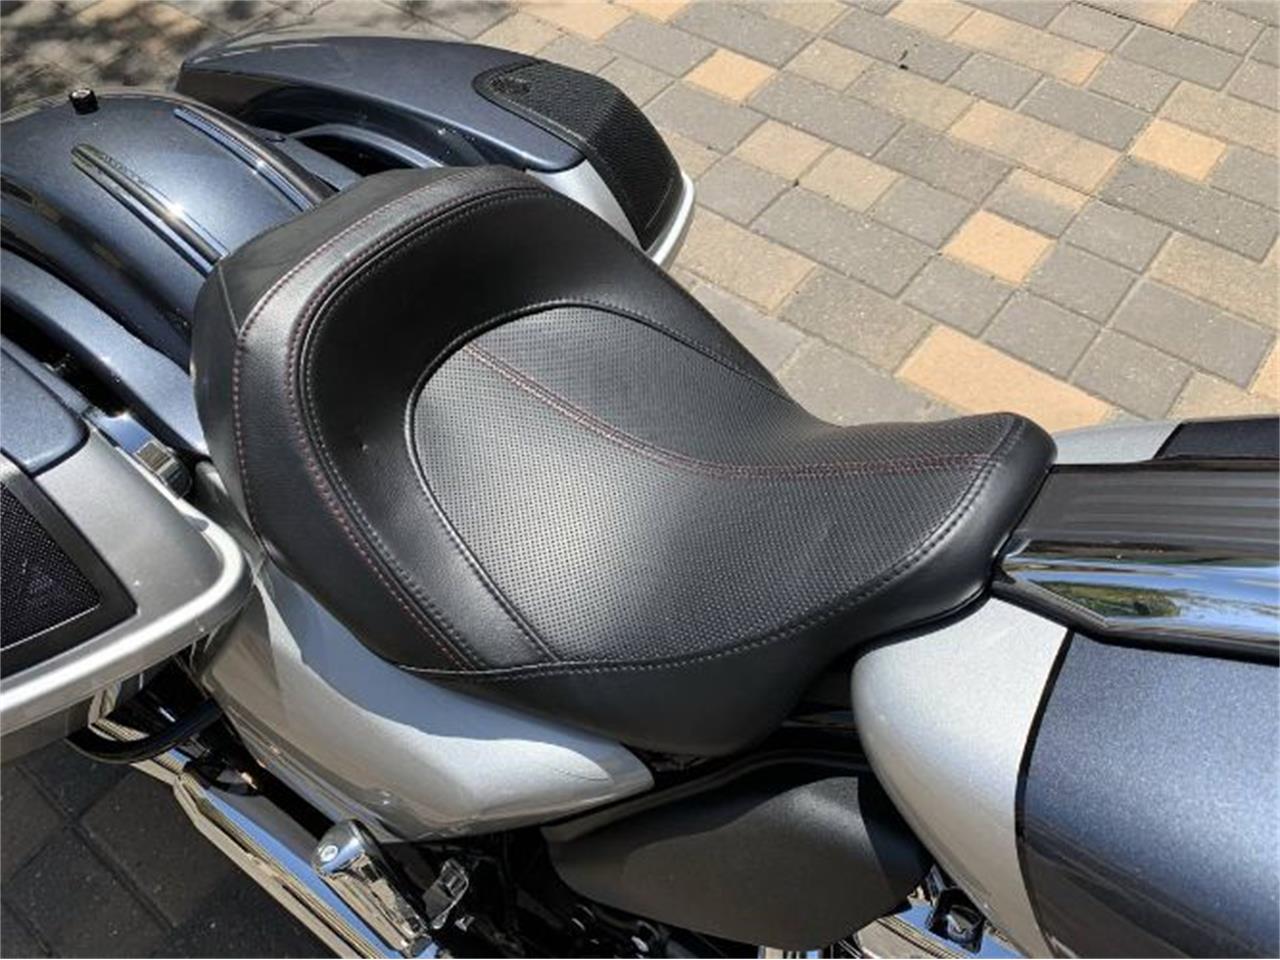 2019 Harley-Davidson Motorcycle for sale in Cadillac, MI – photo 8